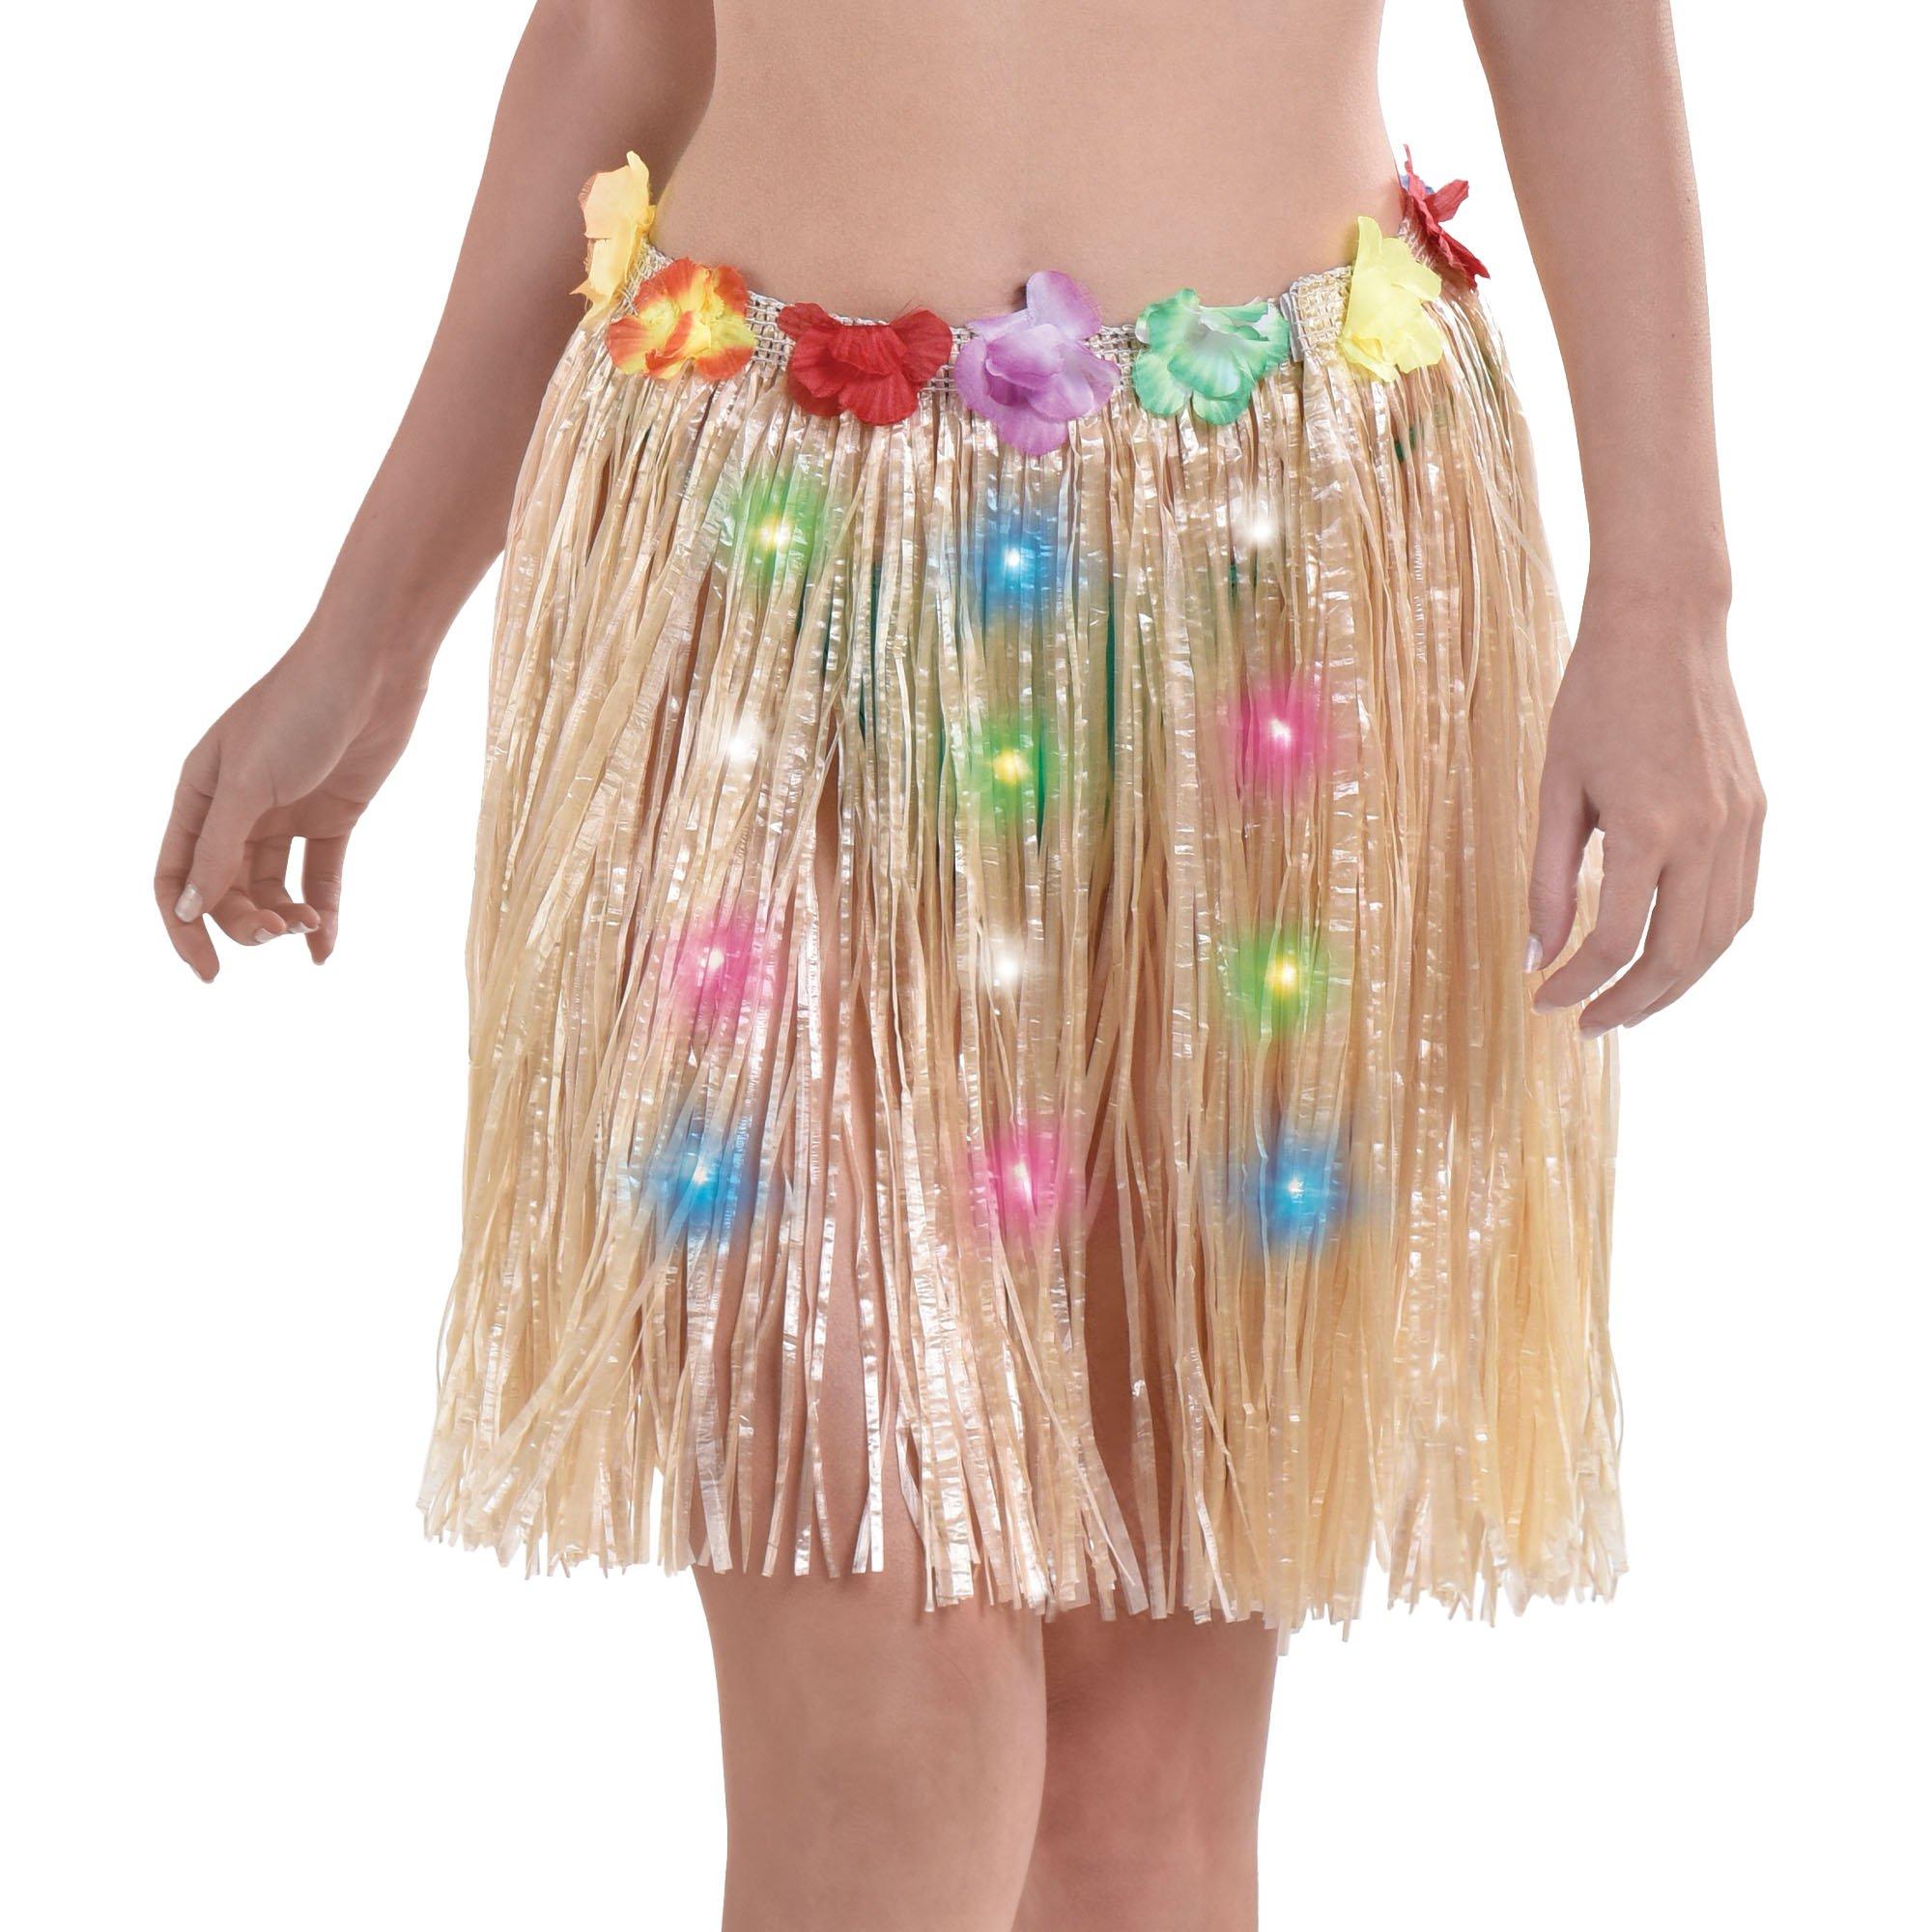 Authentic Natural Grass Skirt Only. Polyesian Natural Manafau, Mo're, Grass  Skirt Or Hula Skirt.